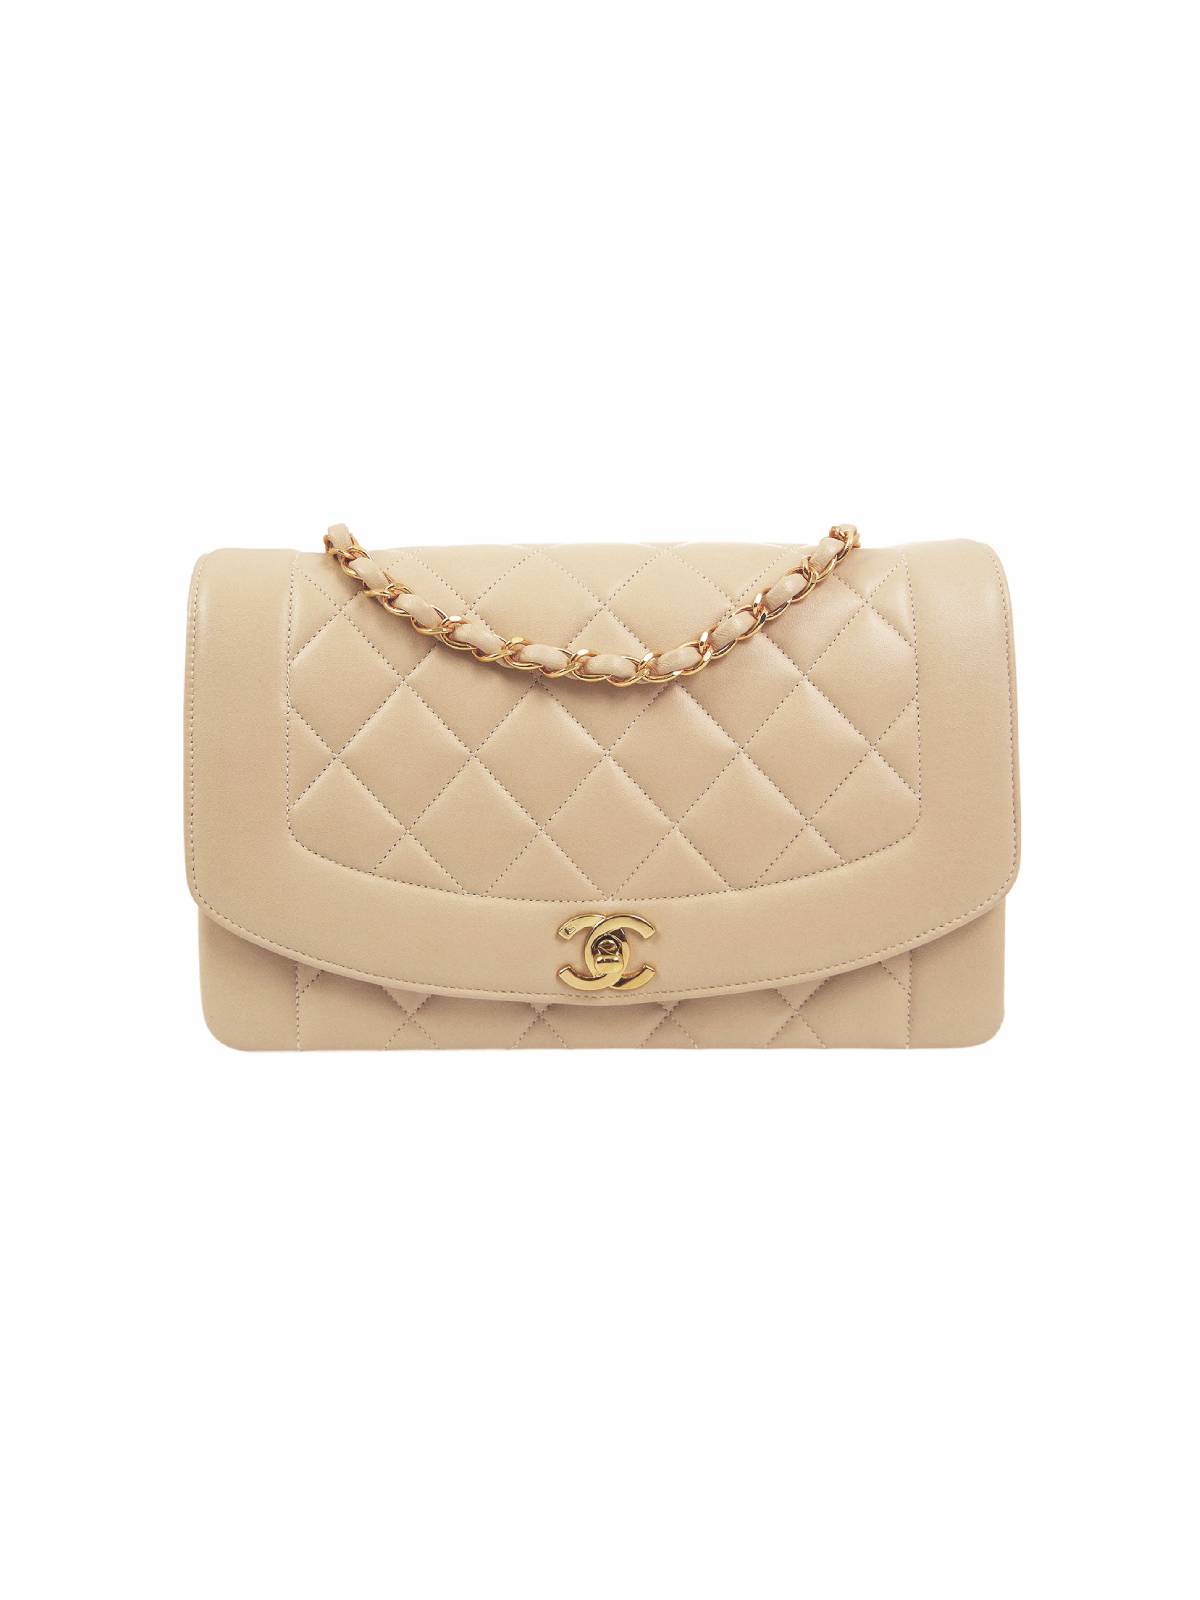 [In Search Of] Beige Quilted Lambskin Vintage Small Diana Bag w/GHW